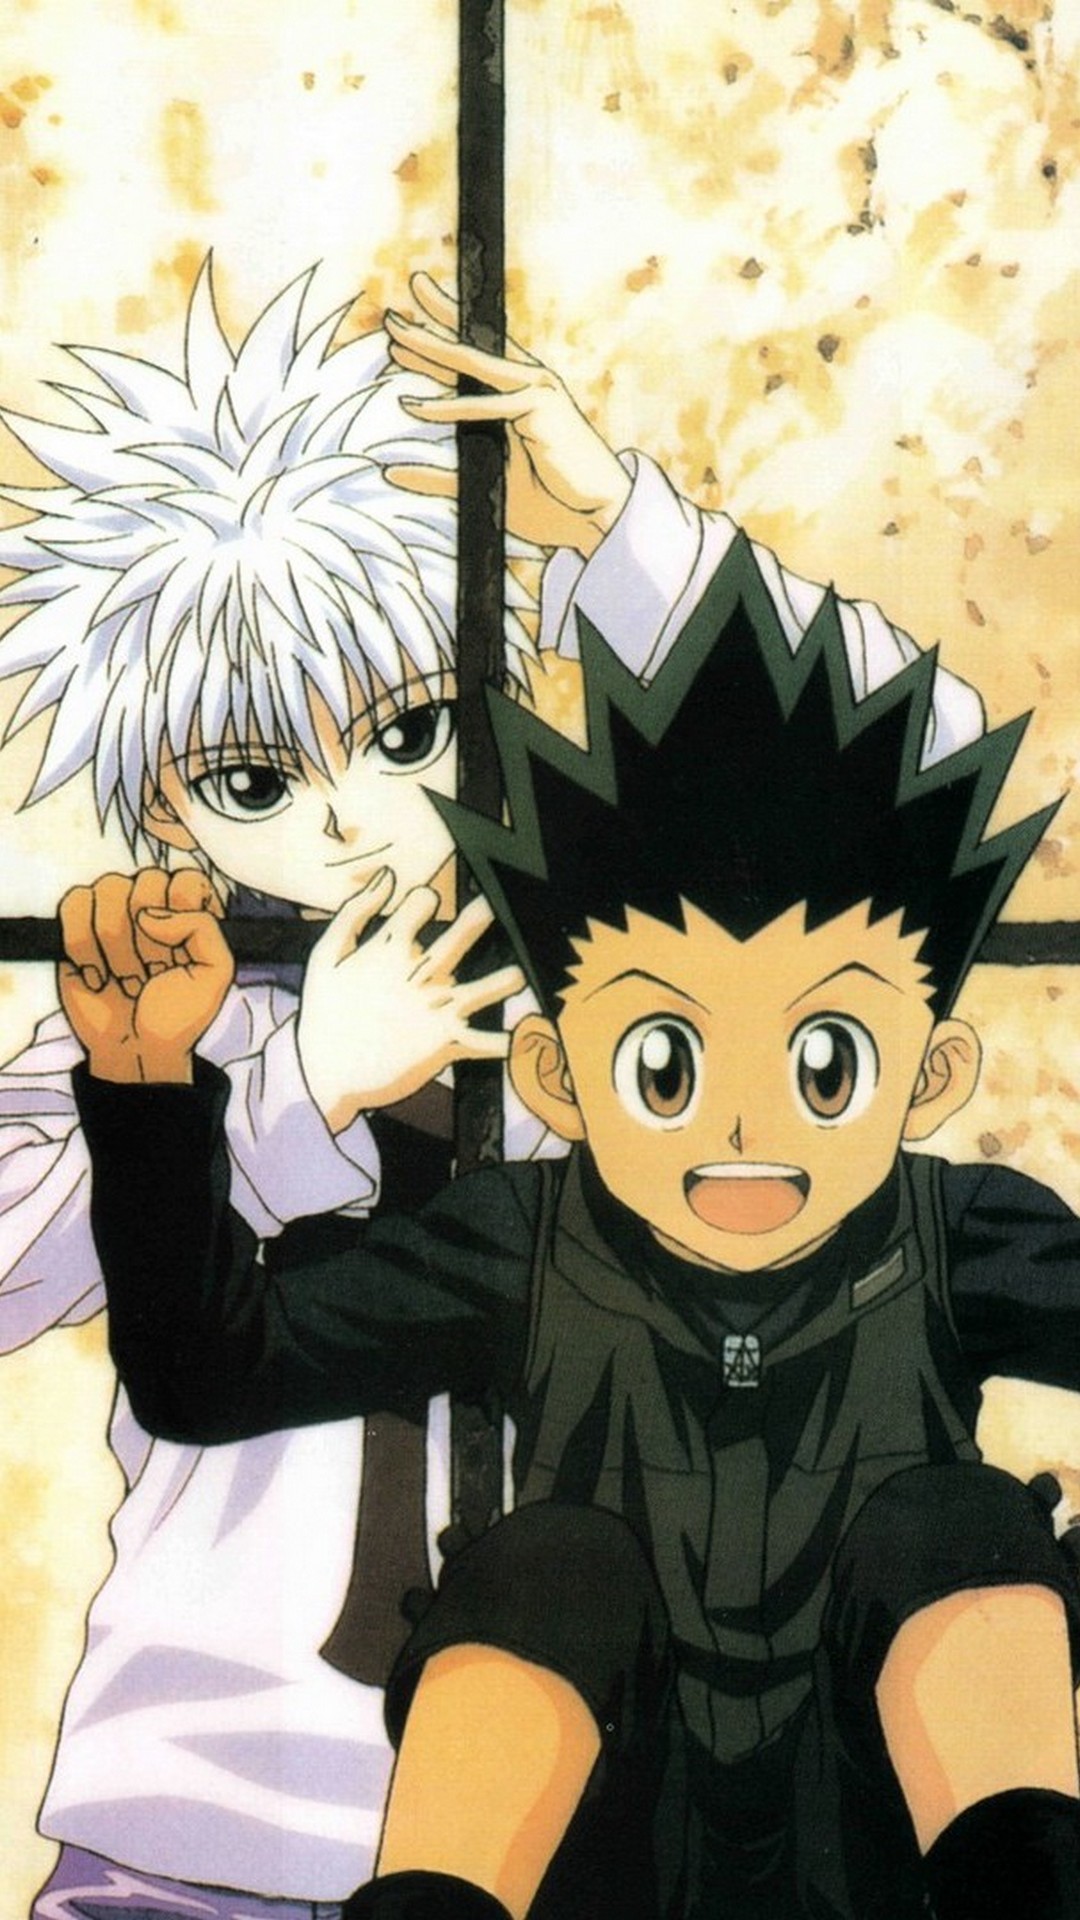 Gon And Killua Wallpaper iPhone With high-resolution 1080X1920 pixel. You can use this wallpaper for your iPhone 5, 6, 7, 8, X, XS, XR backgrounds, Mobile Screensaver, or iPad Lock Screen